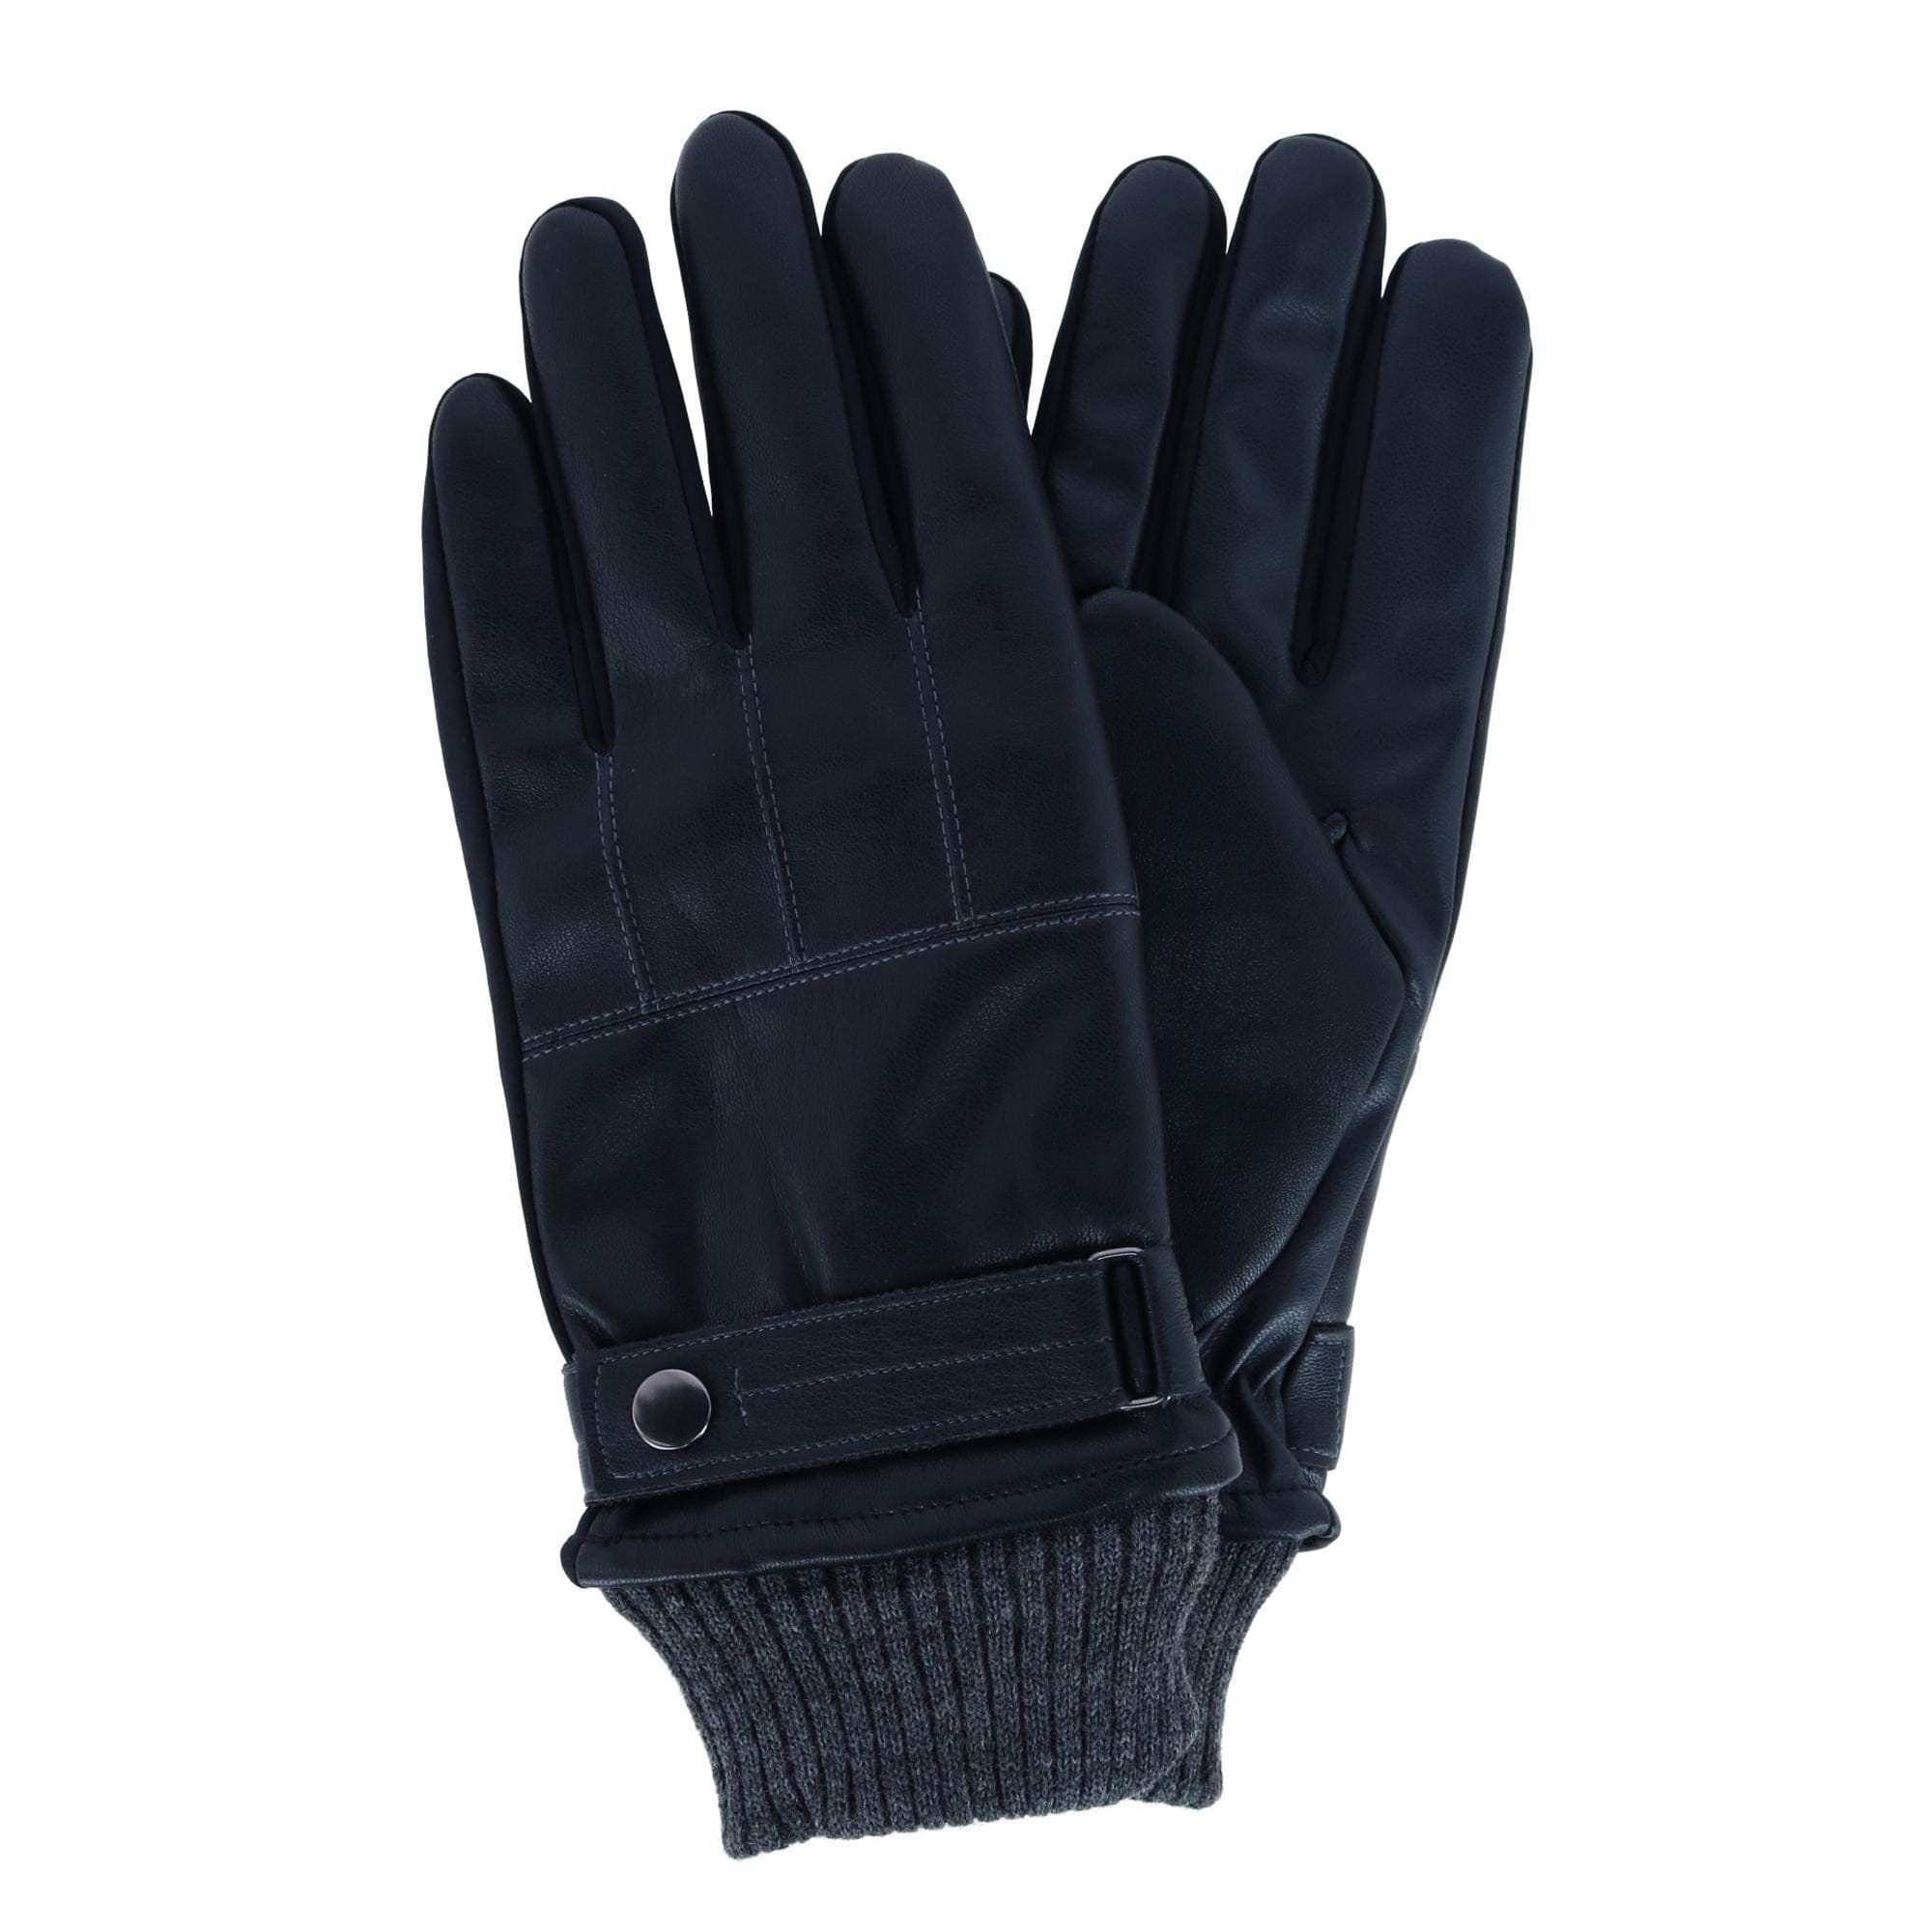 isotoner womens Stretch Classics Fleece Lined Winter Gloves, Black